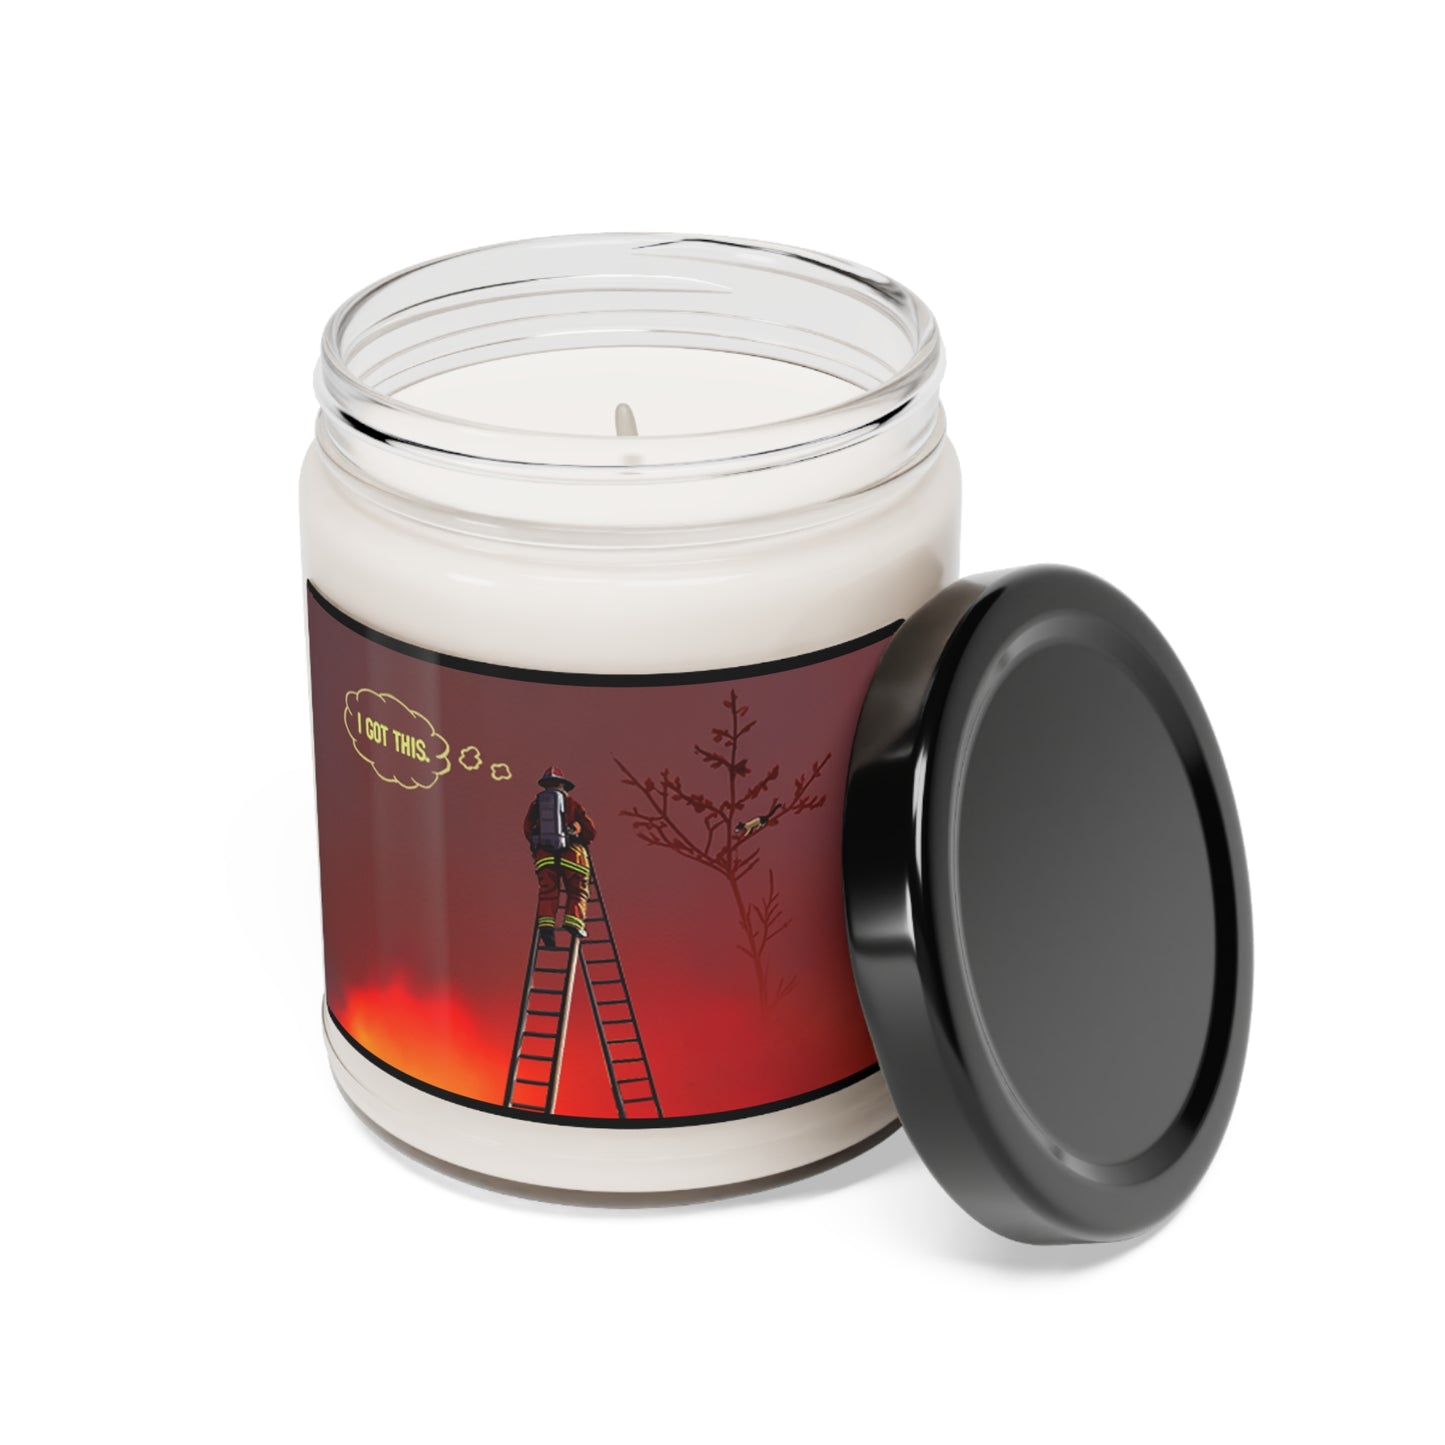 Scented Soy Candle, 9oz - Fireman Saving a Cat